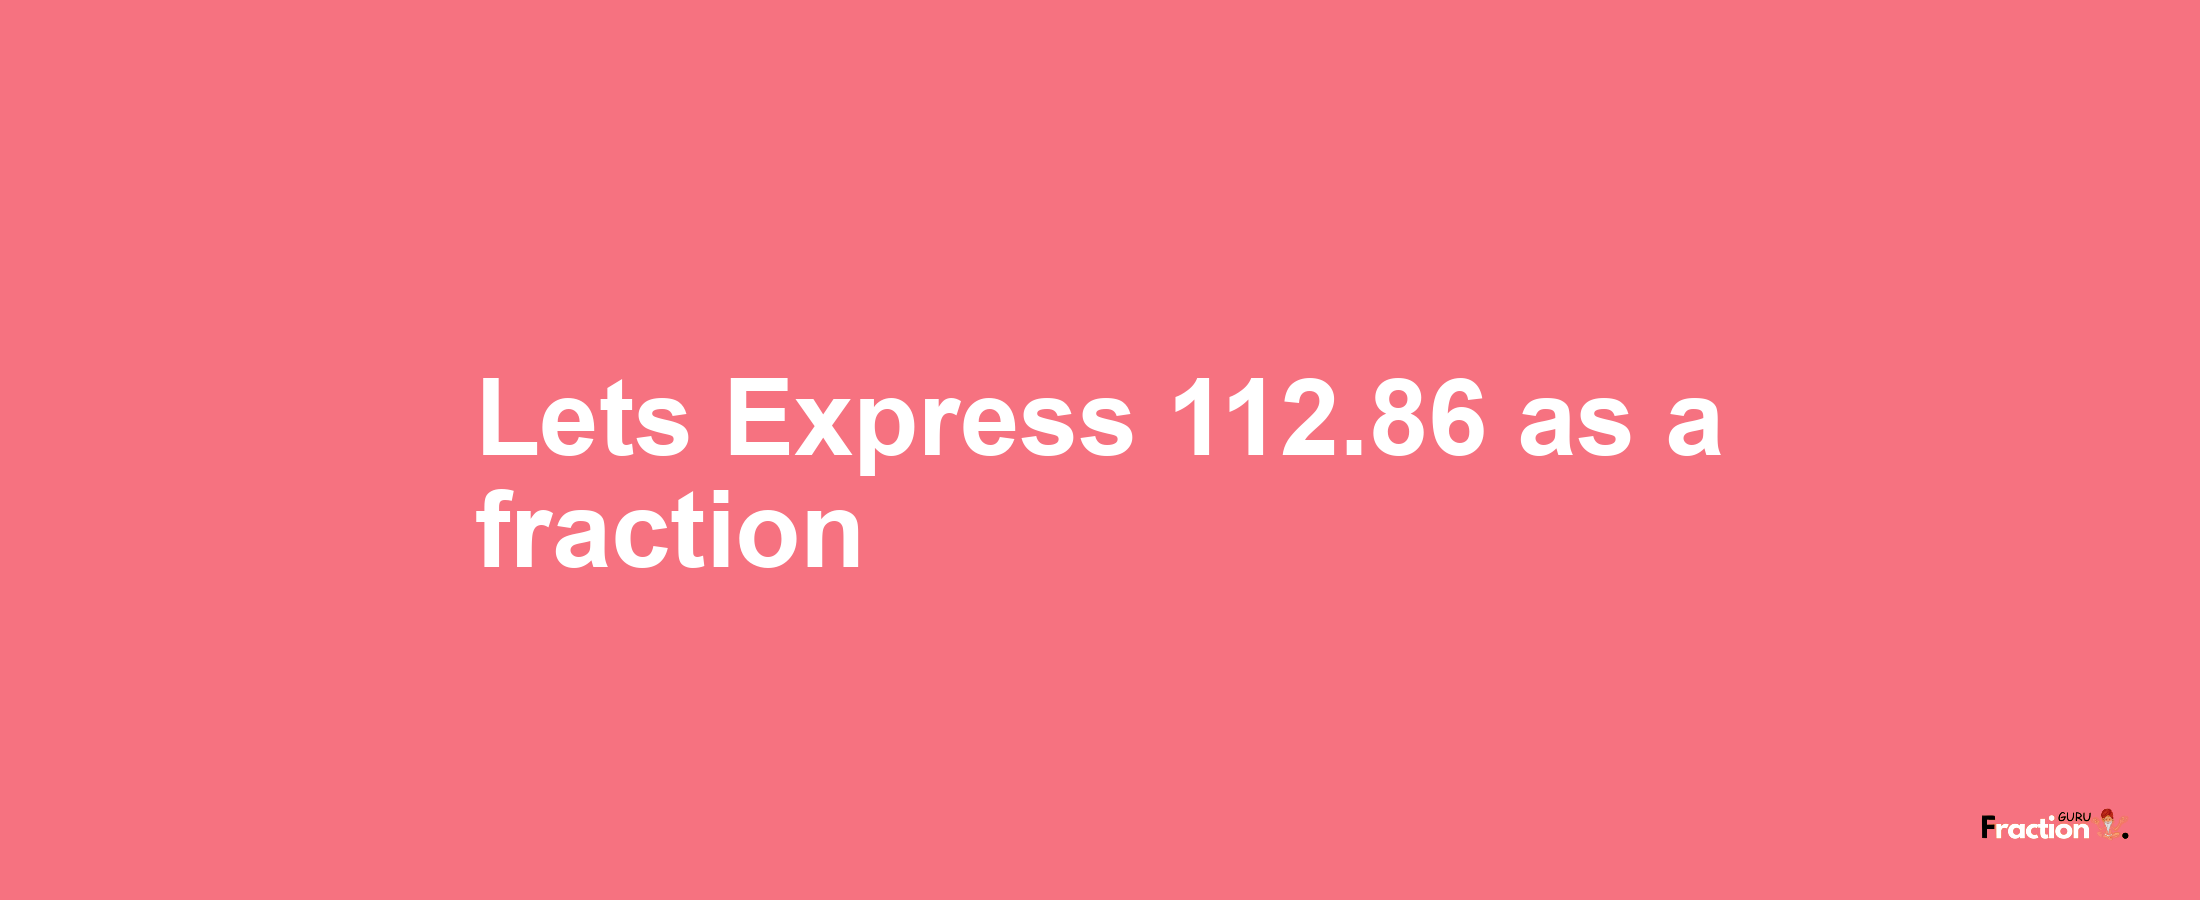 Lets Express 112.86 as afraction